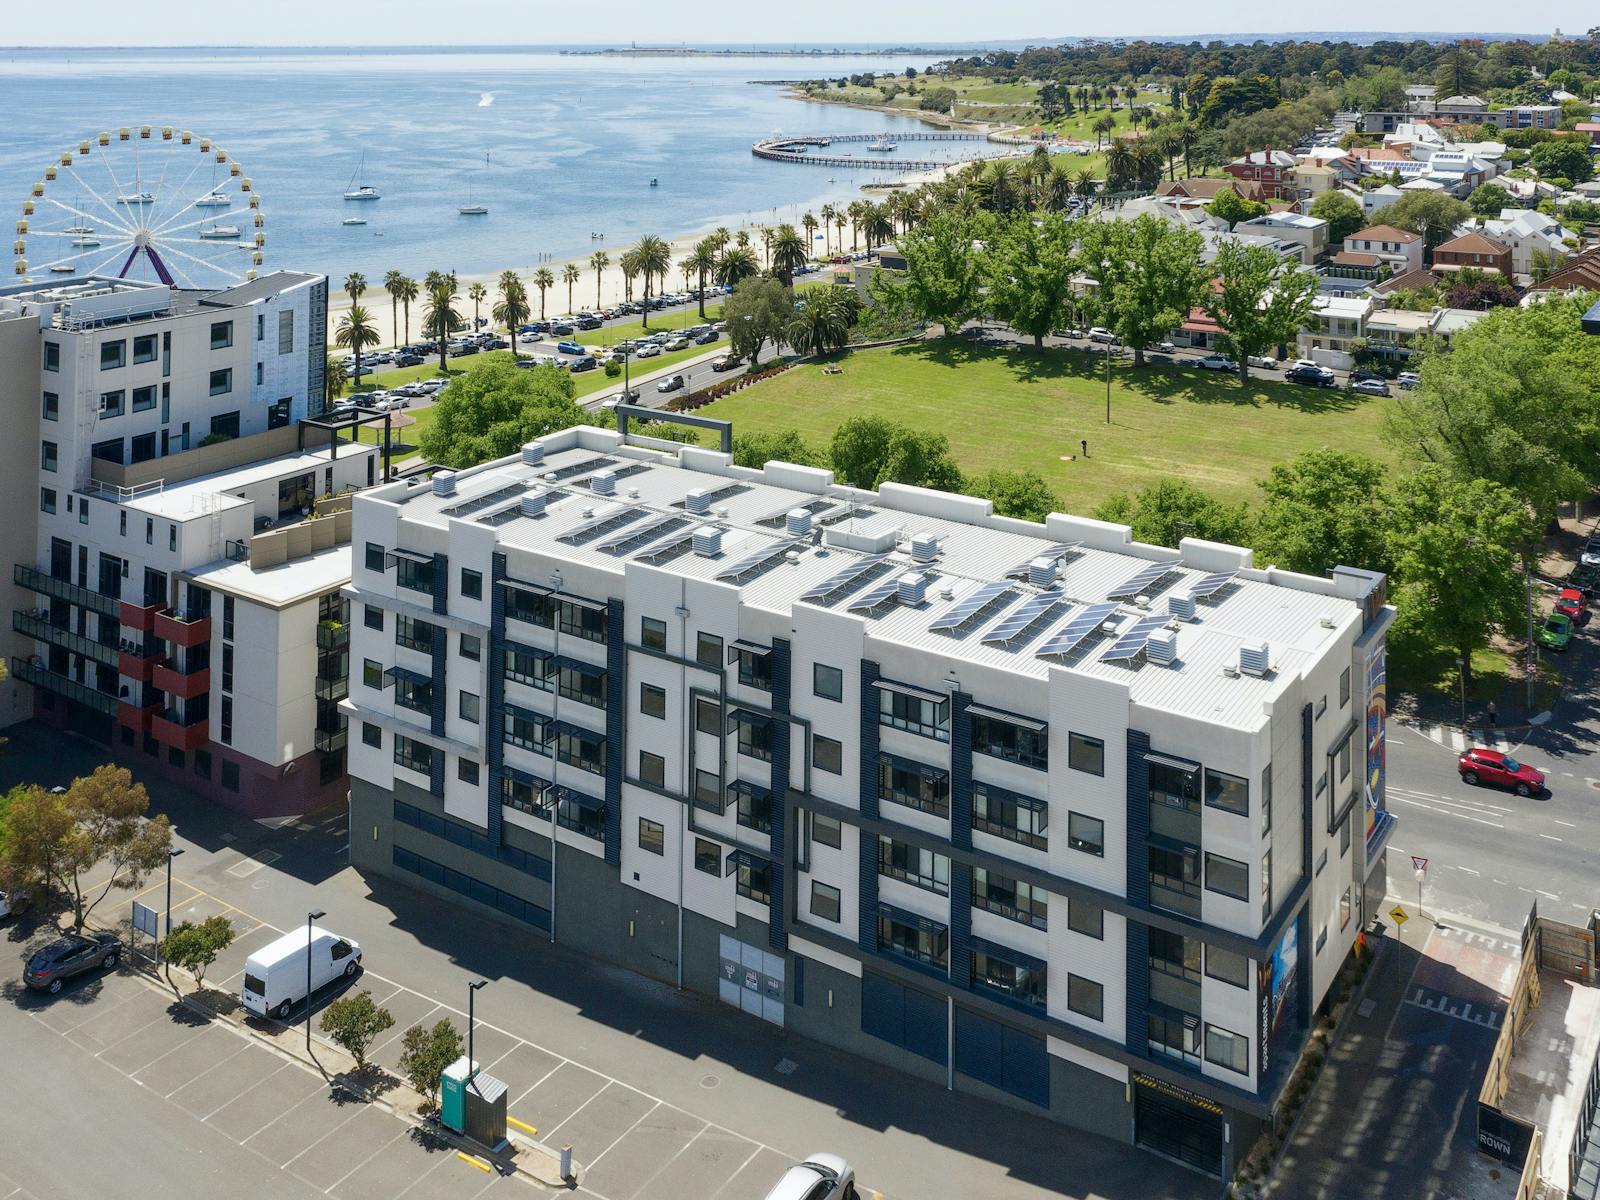 The Vie Apartment Hote building looking over the Geelong Waterfront and ferris wheel.